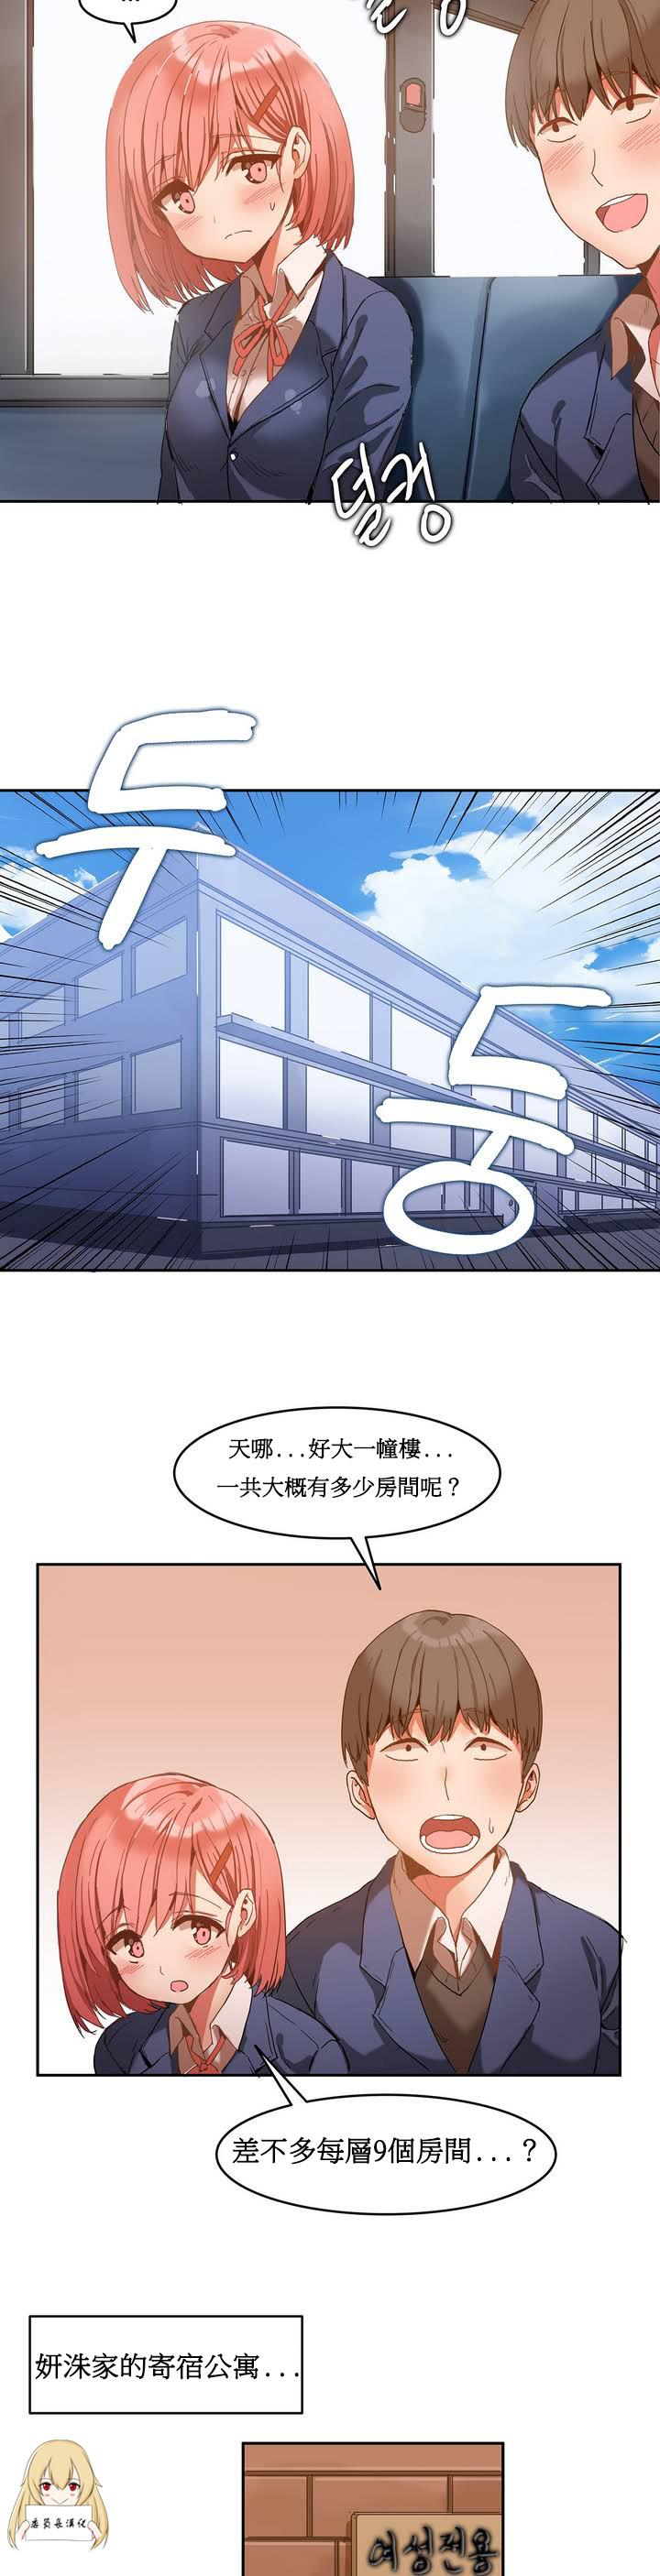 Scandal Hahri's Lumpy Boardhouse Ch. 0~29【委員長個人漢化】（持續更新） Yanks Featured - Page 11